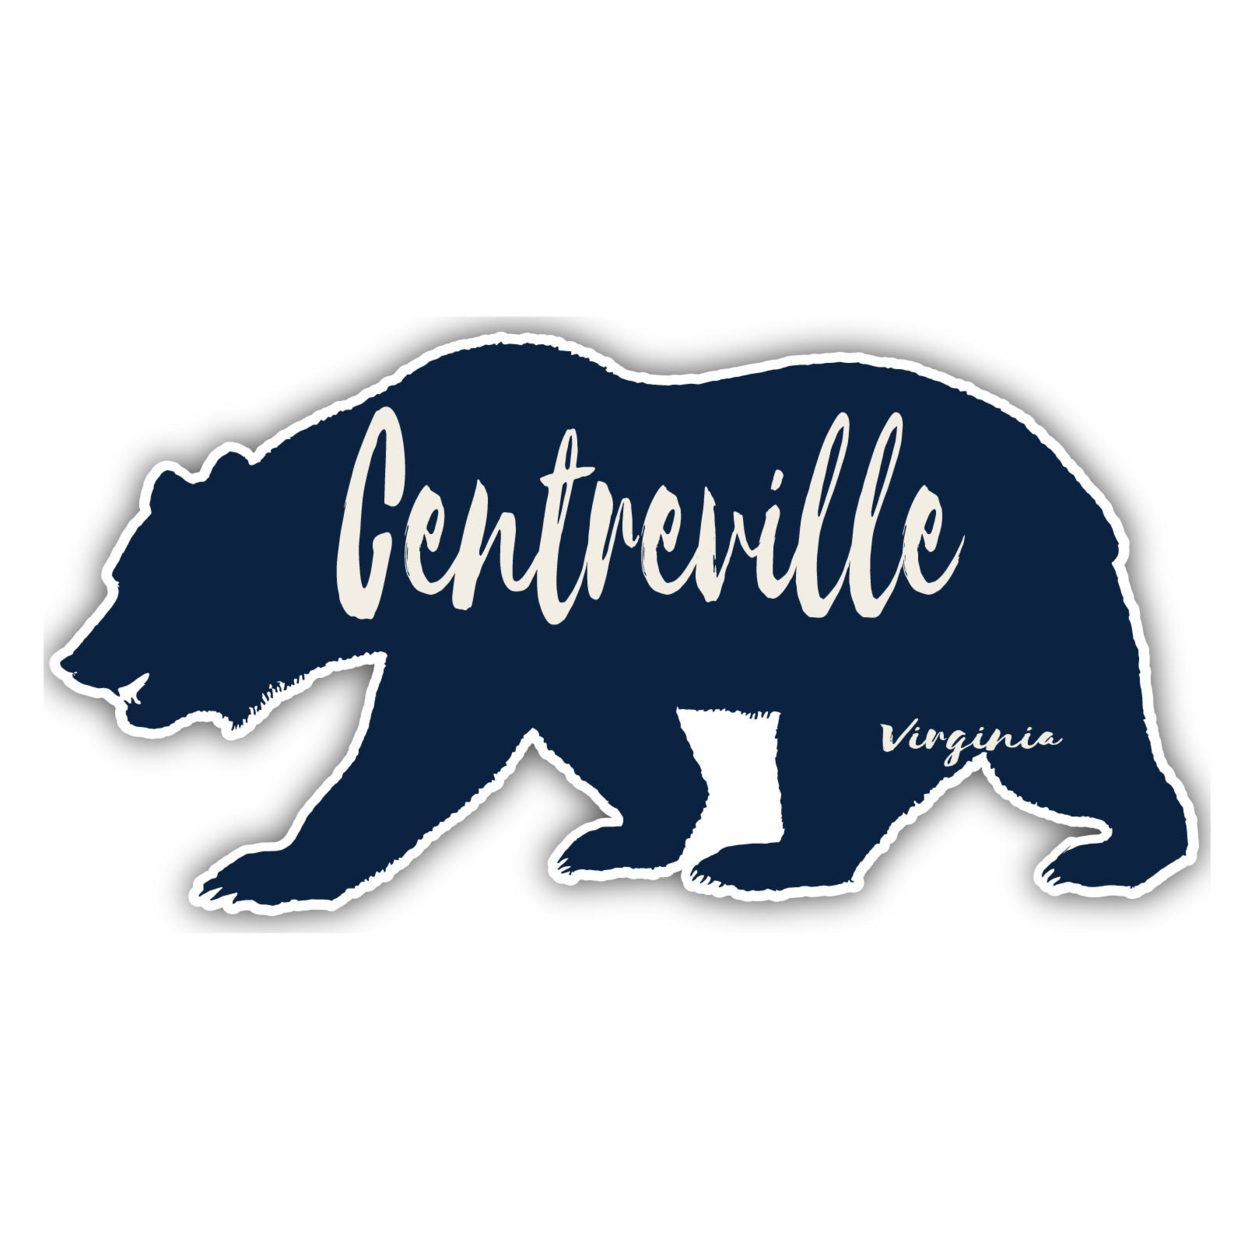 Centreville Virginia Souvenir Decorative Stickers (Choose Theme And Size) - 4-Pack, 12-Inch, Bear